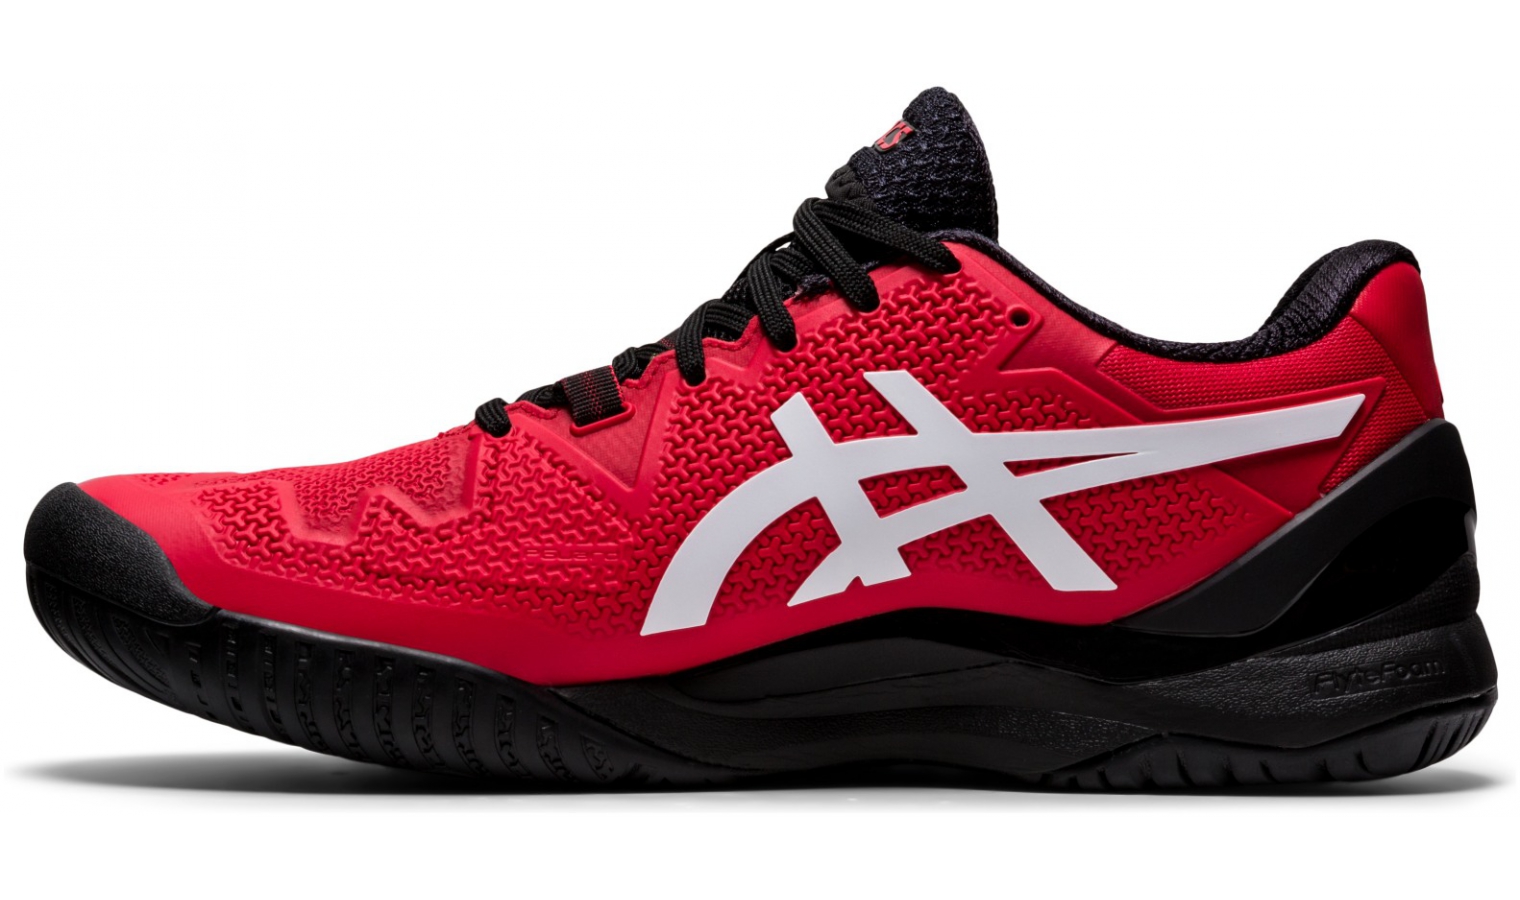 Mens tennis shoes Asics GEL-RESOLUTION 8 red | AD Sport.store